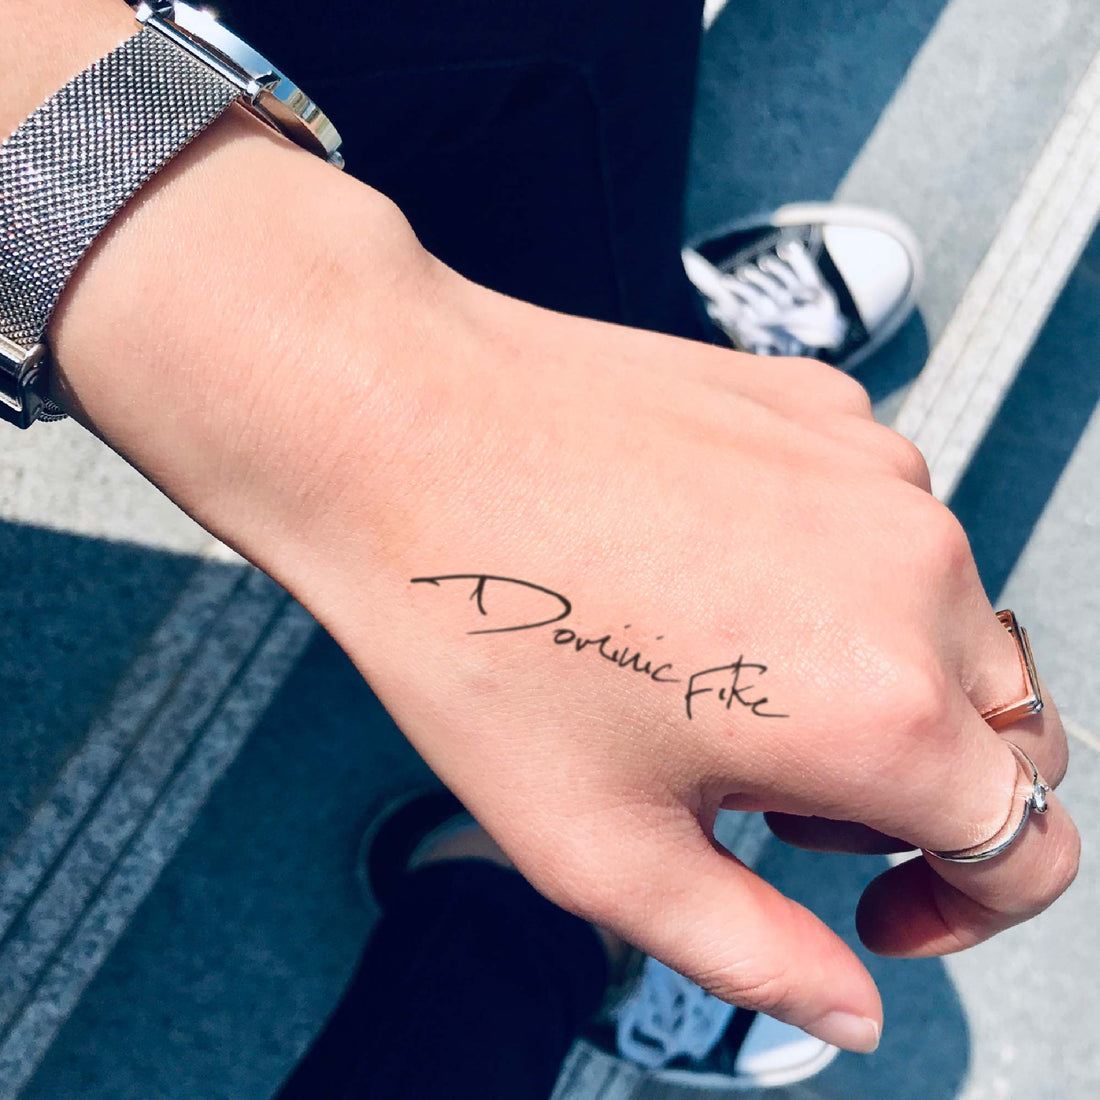 Dominic Fike custom temporary tattoo sticker design idea inspiration meanings removal arm wrist hand words font name signature calligraphy lyrics tour concert outfits merch accessory gift souvenir costumes wear dress up code